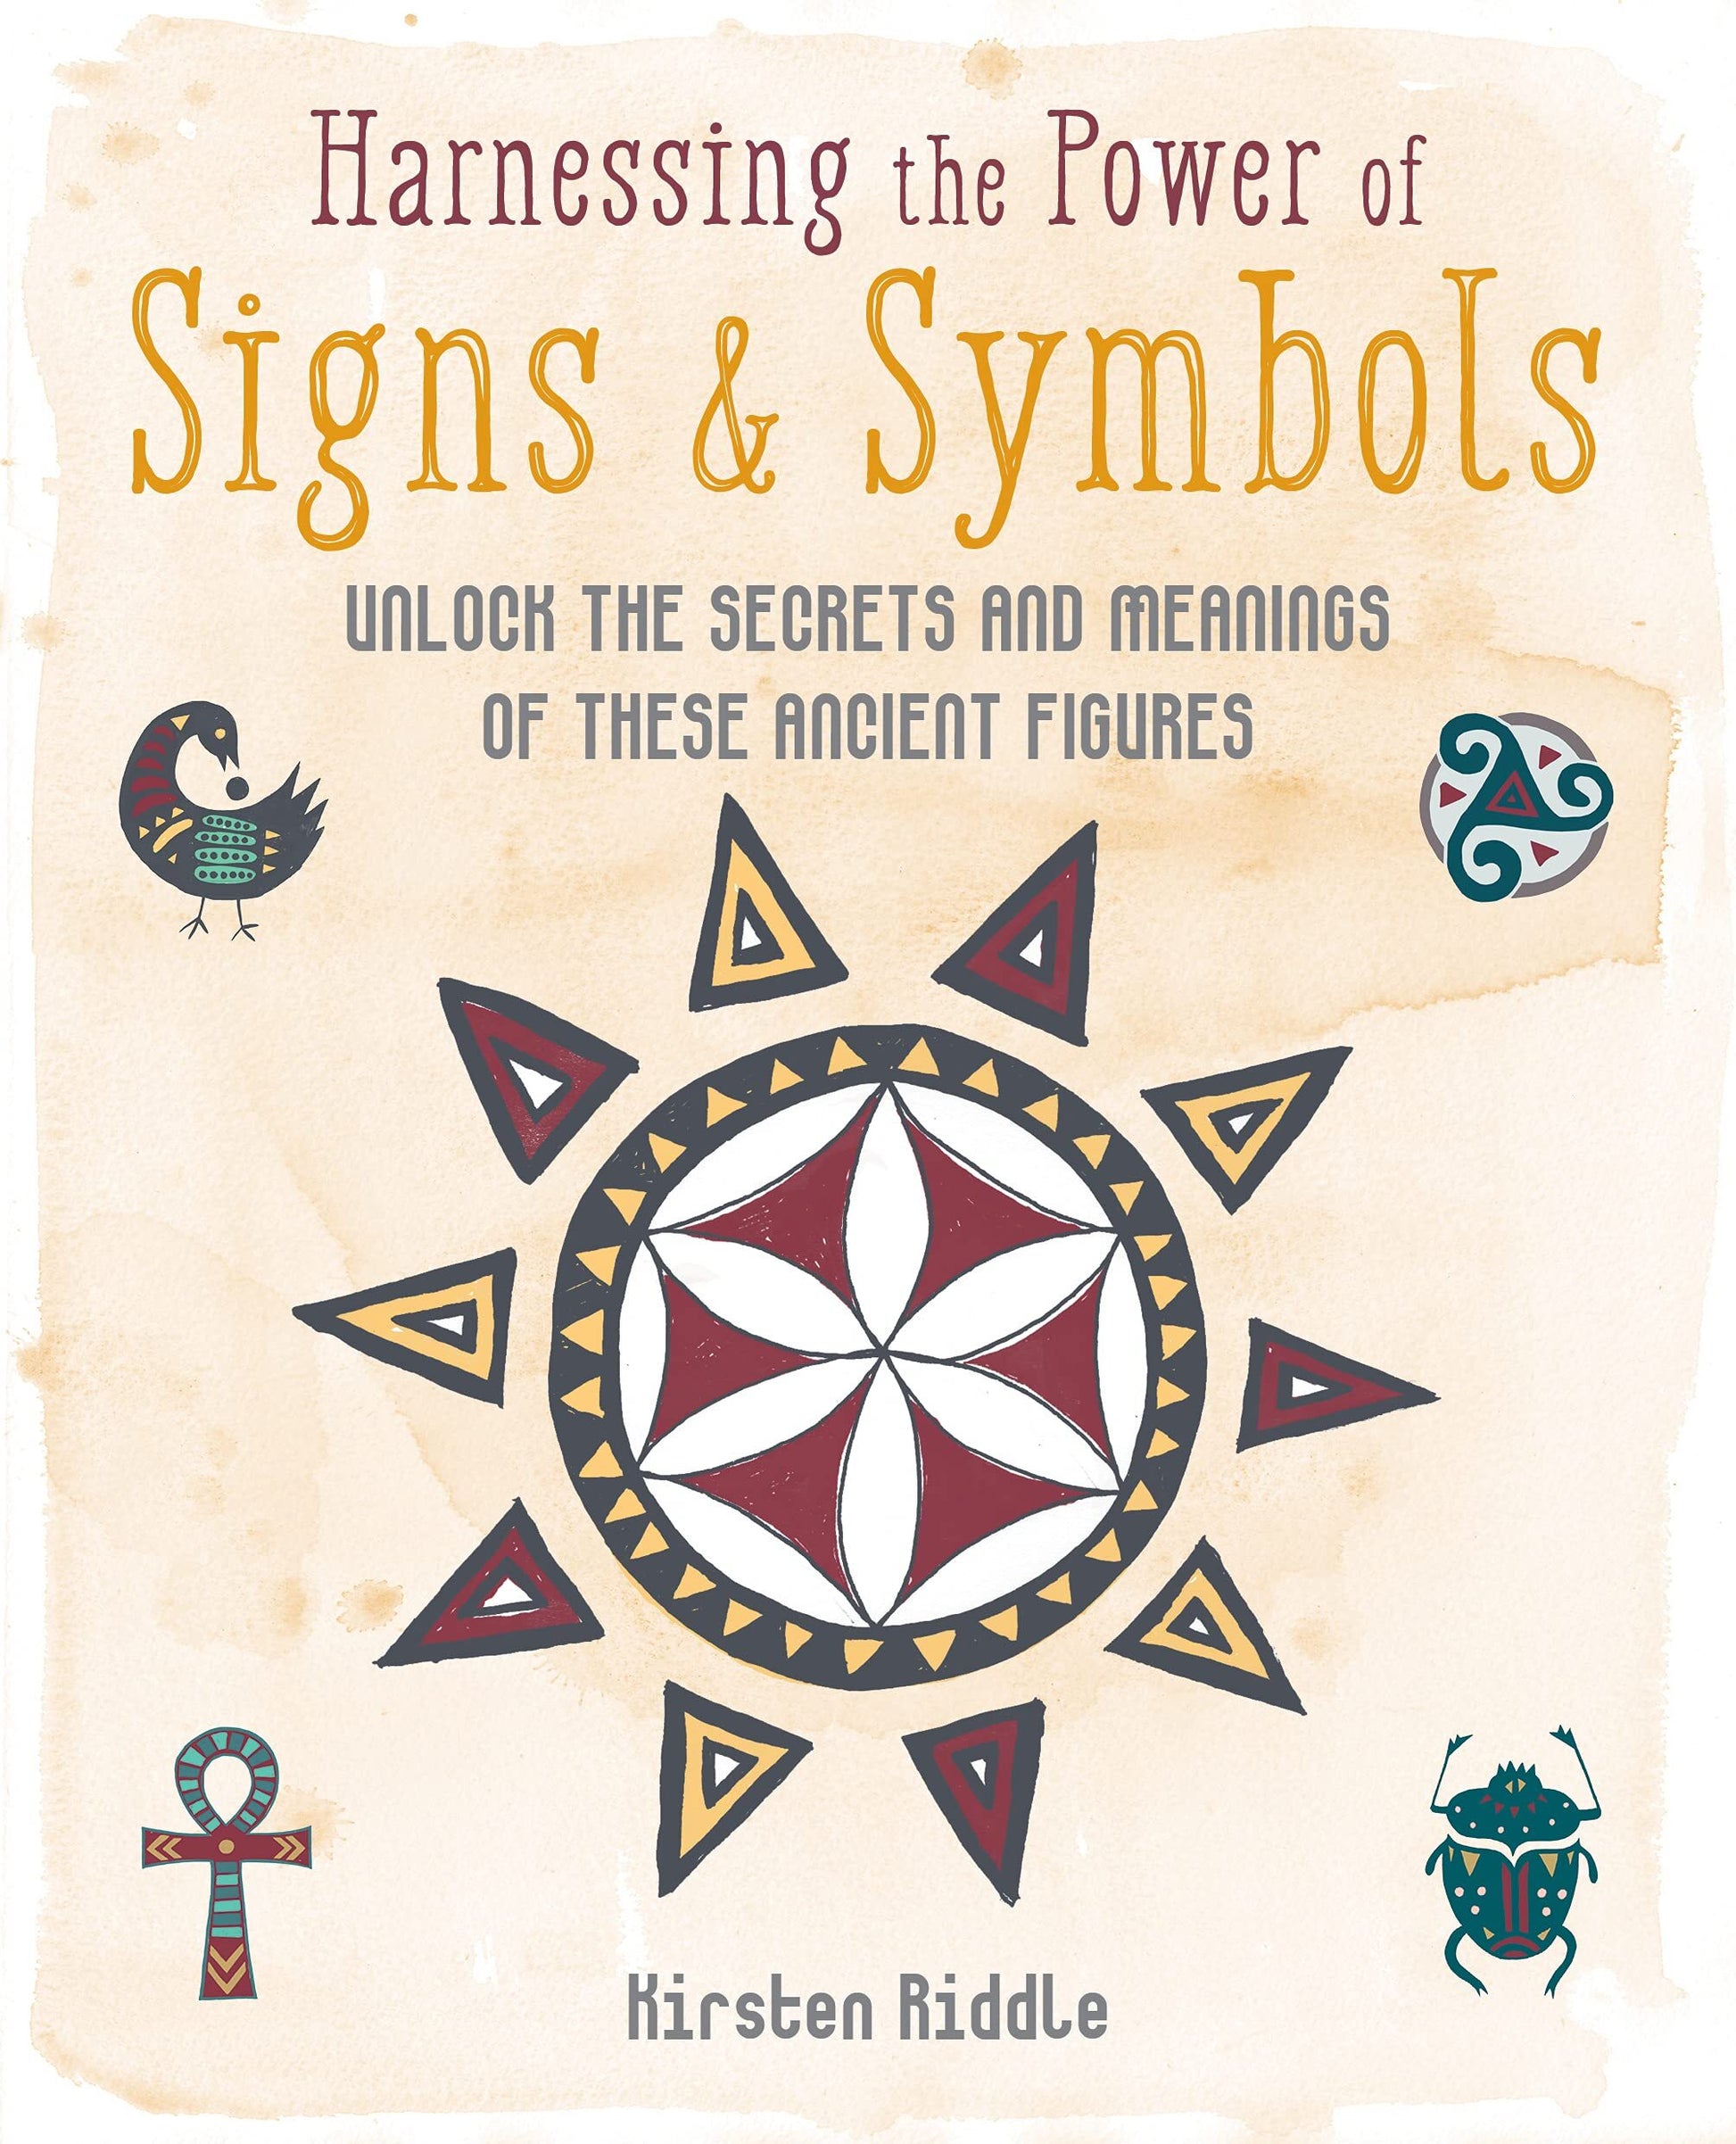 Harnessing the Power of Signs & Symbols: Unlock the secrets and meanings of these ancient figures Hardcover